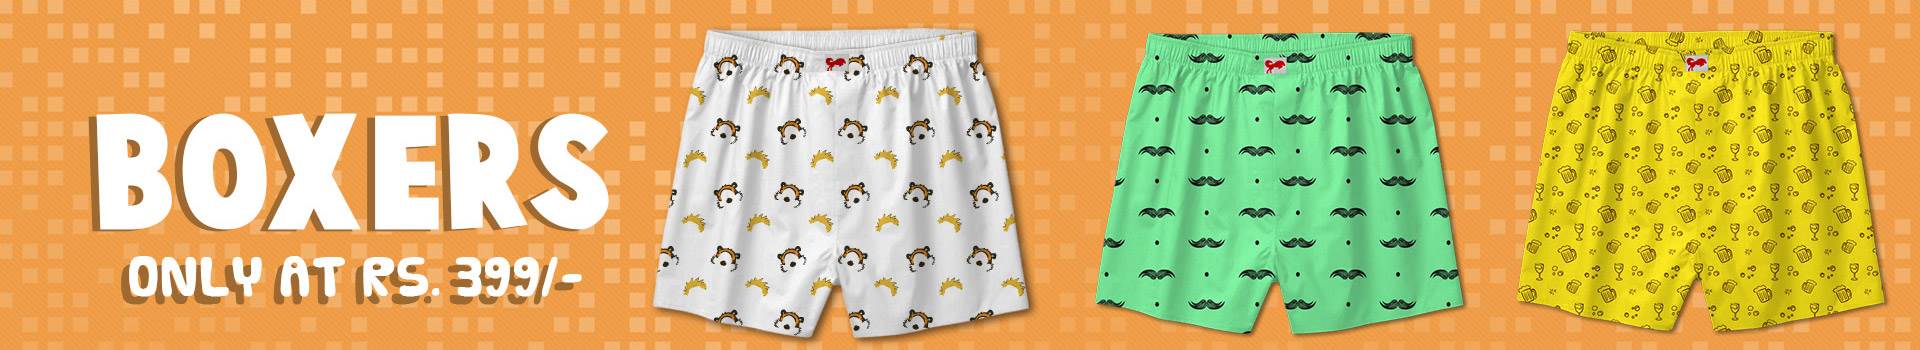 Category Banner - Boxer Shorts